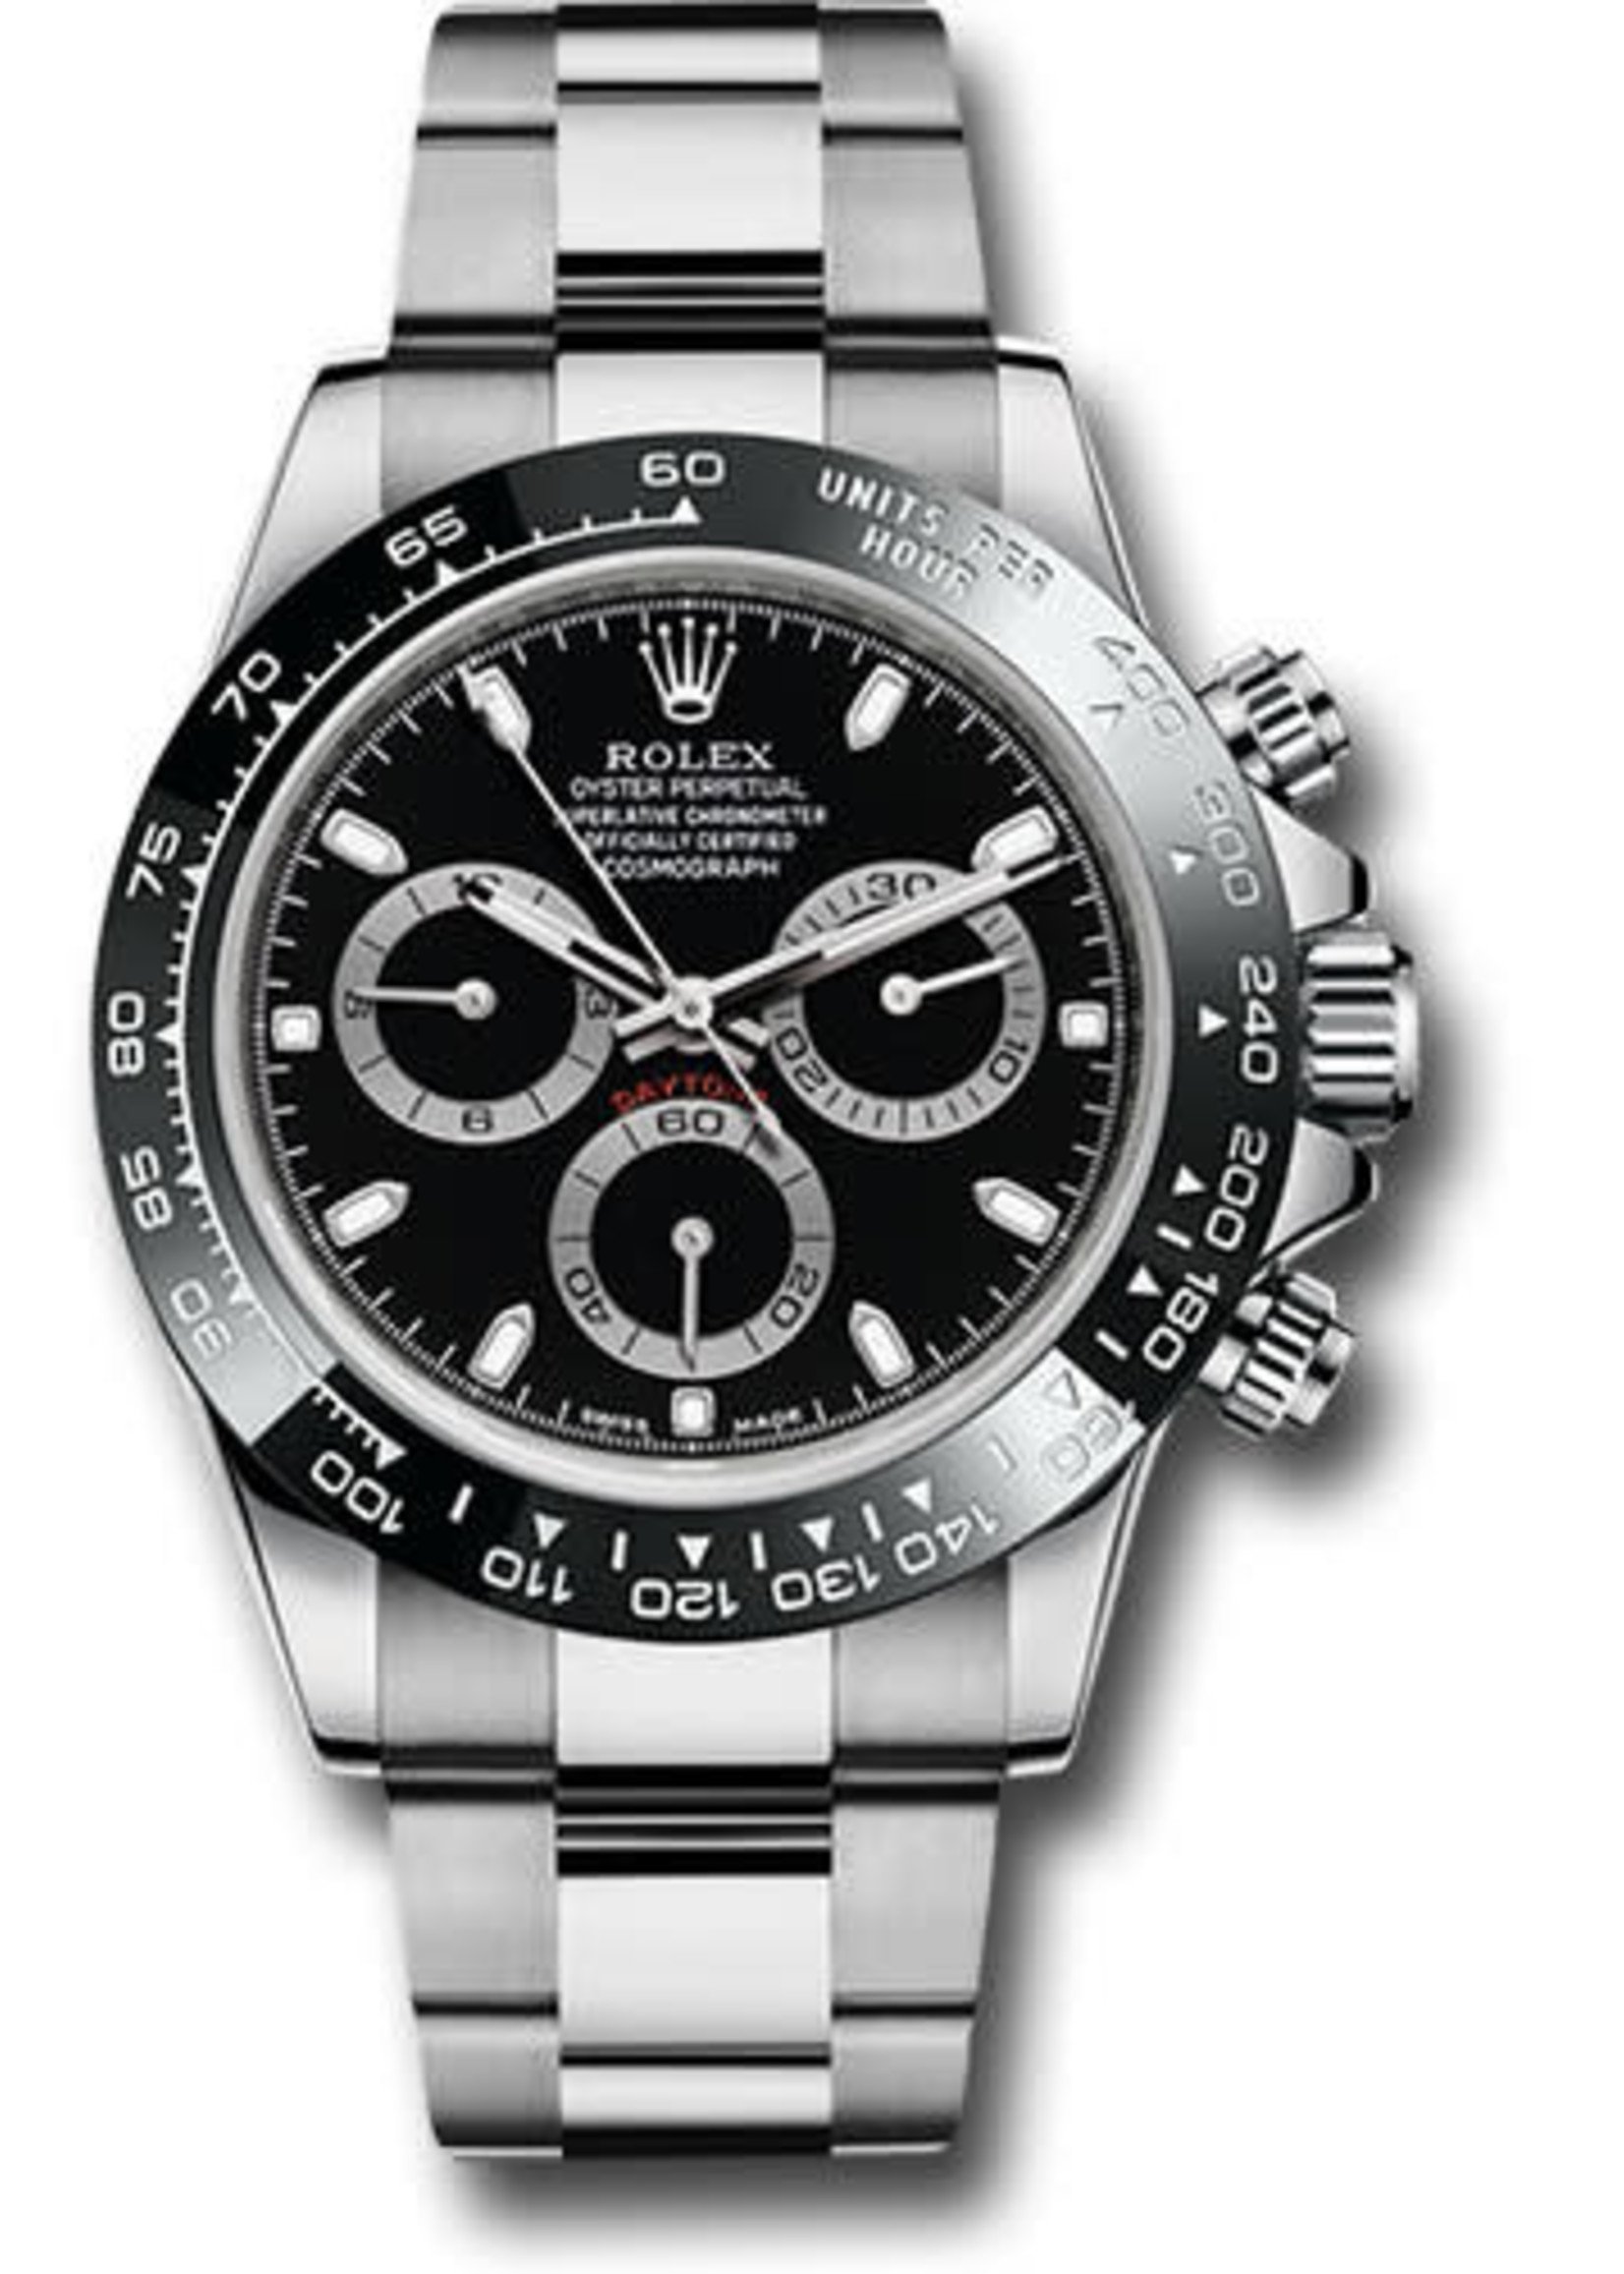 Rolex Watches ROLEX DAYTONA 40MM #116500LN (2018 B+P) BY APPOINTMENT ONLY